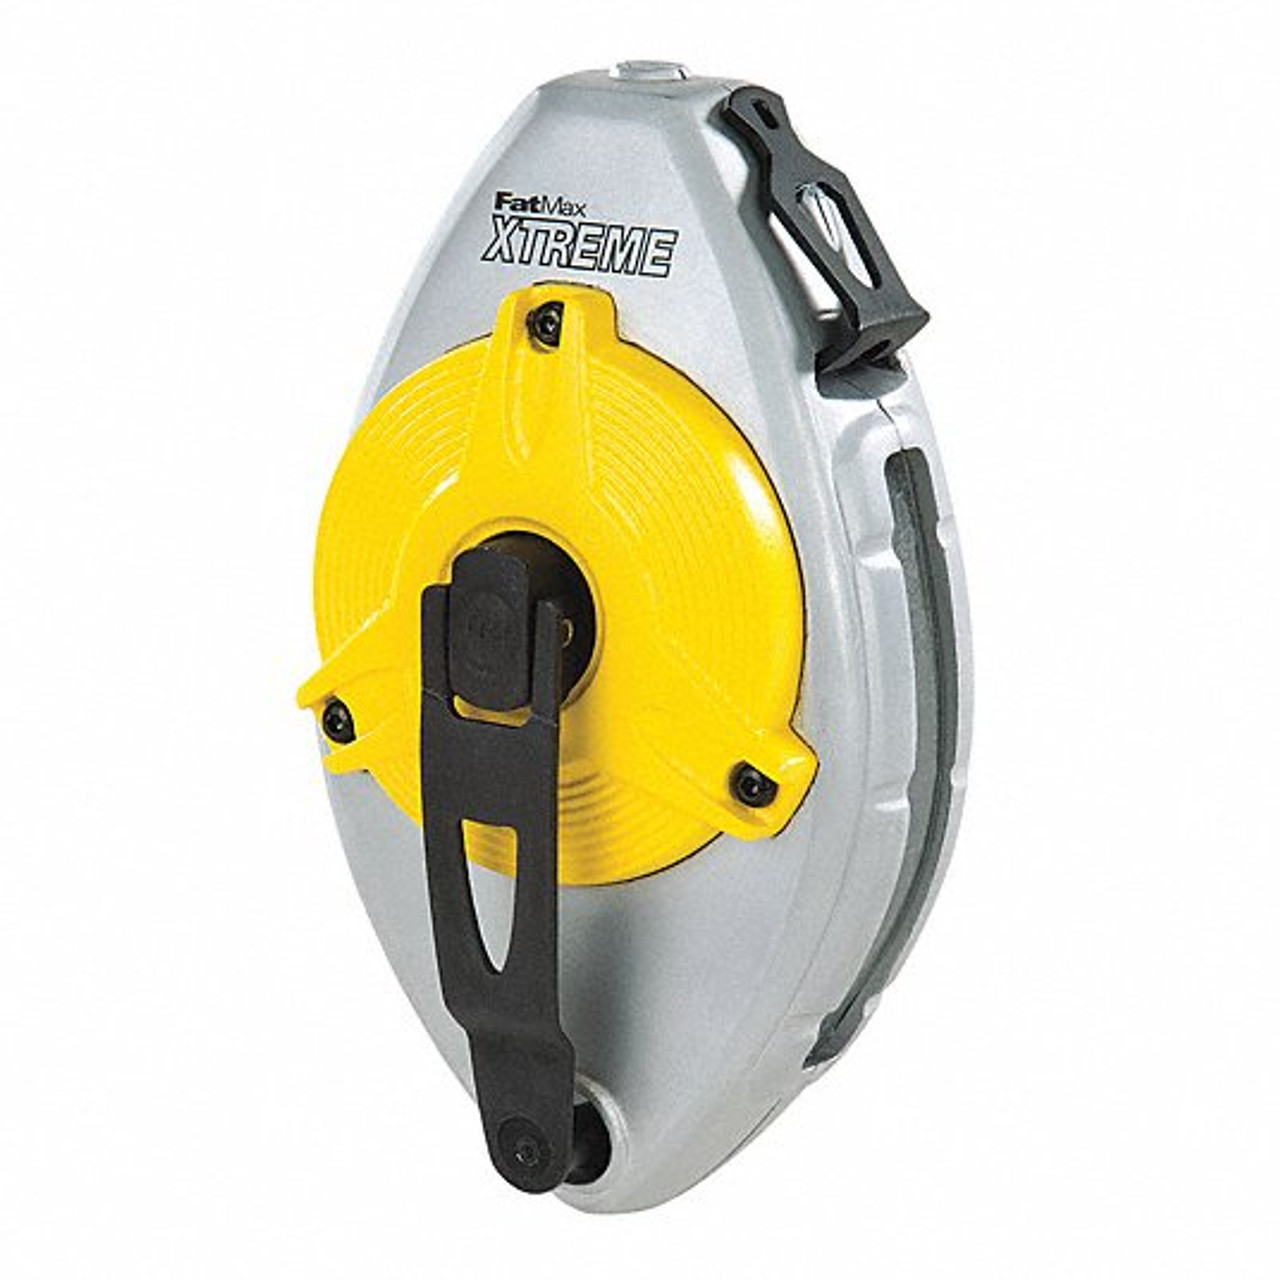 Stanley Products FatMax Xtreme Chalk Line Reel, 100' #47-480L (6